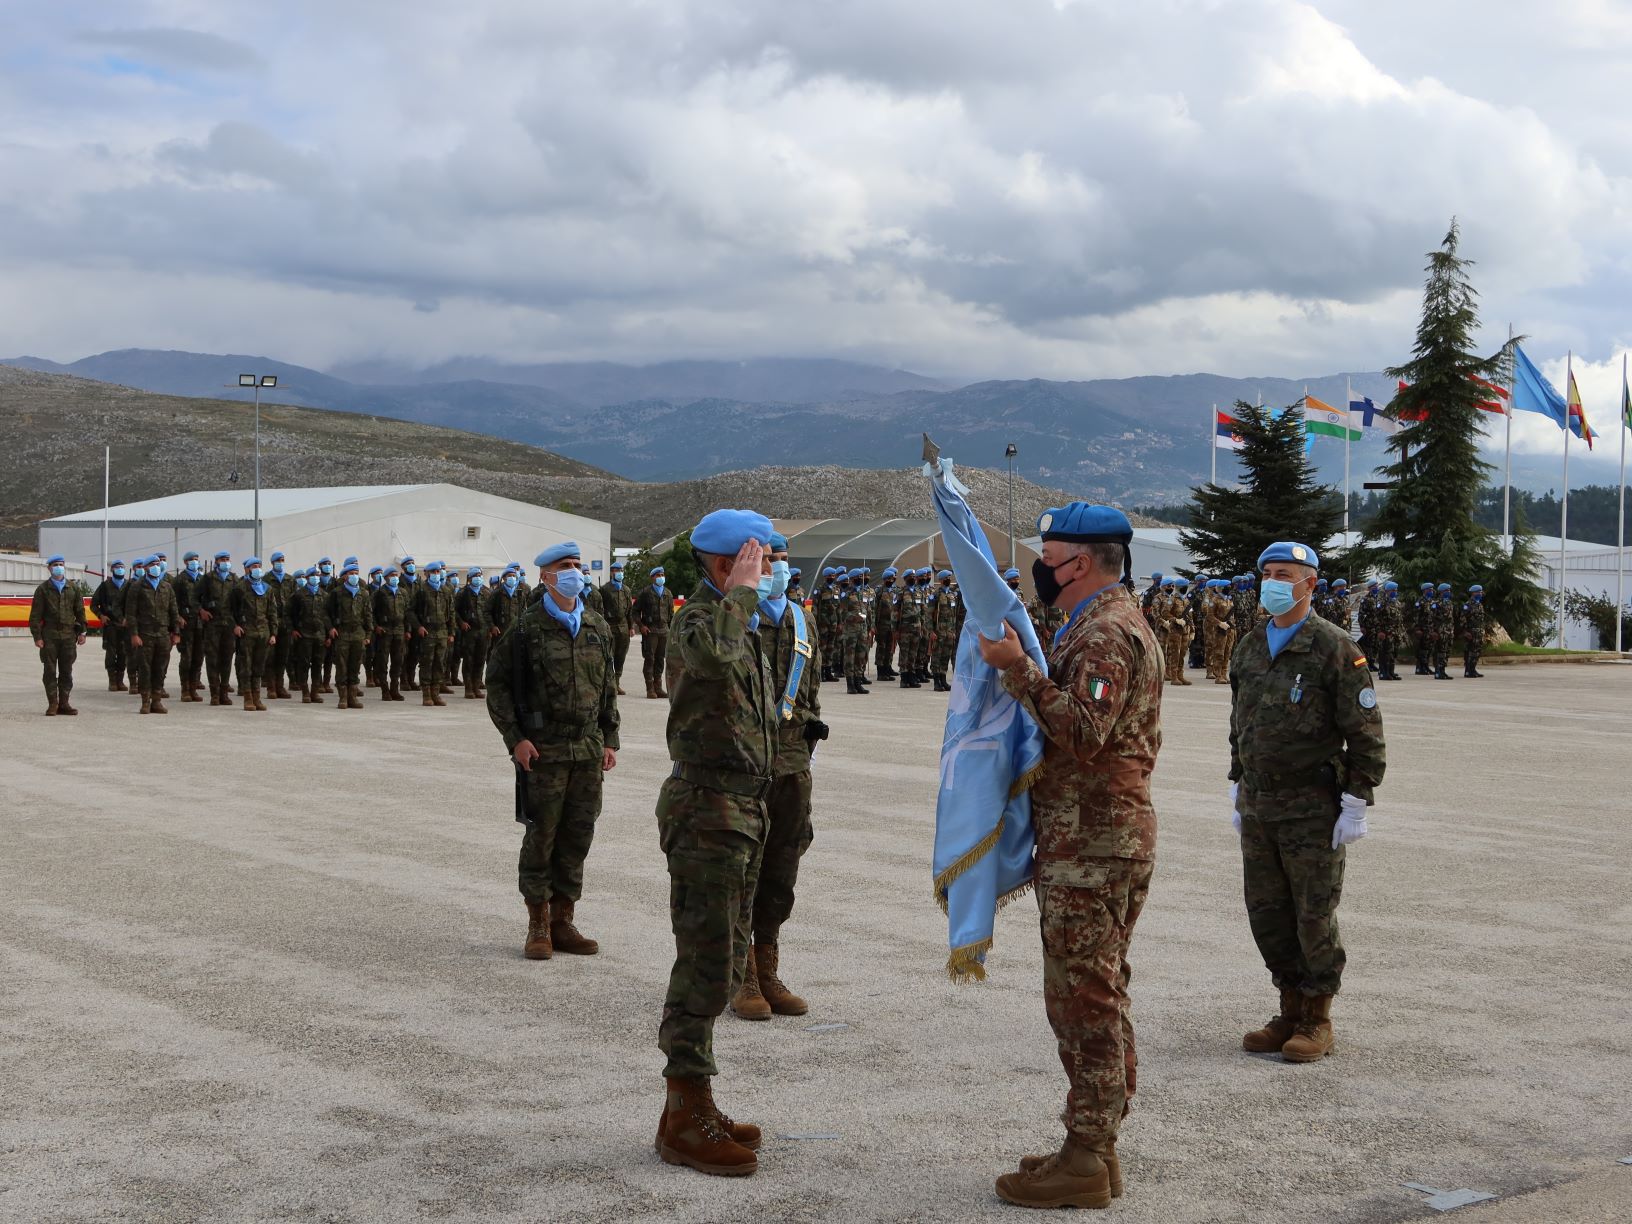 Brigade “Guadarrama” XII takes over UNIFIL's Sector East Command Post